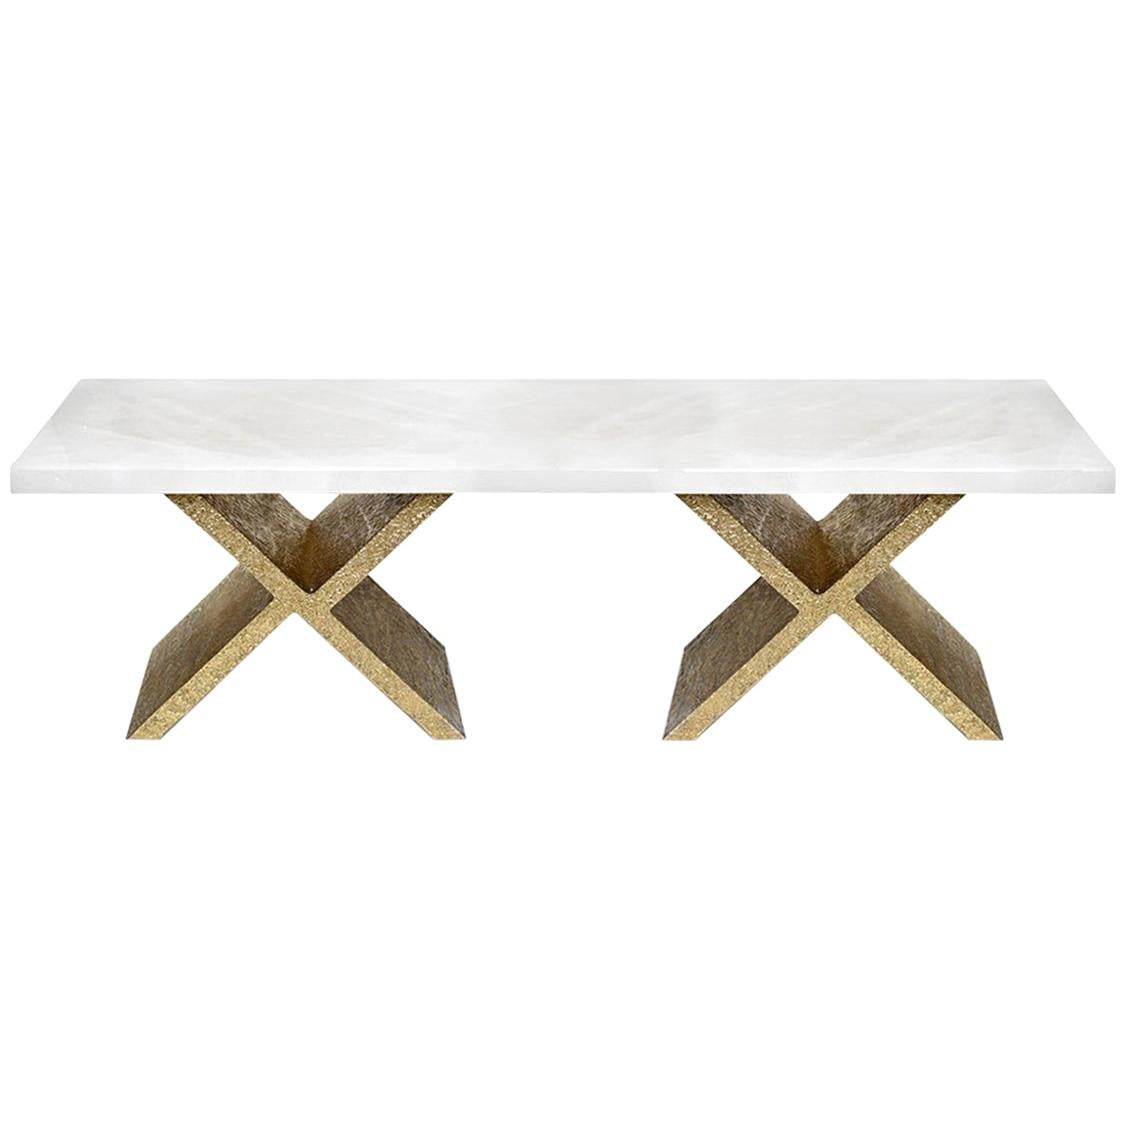 Double X Coffee Table by Phoenix